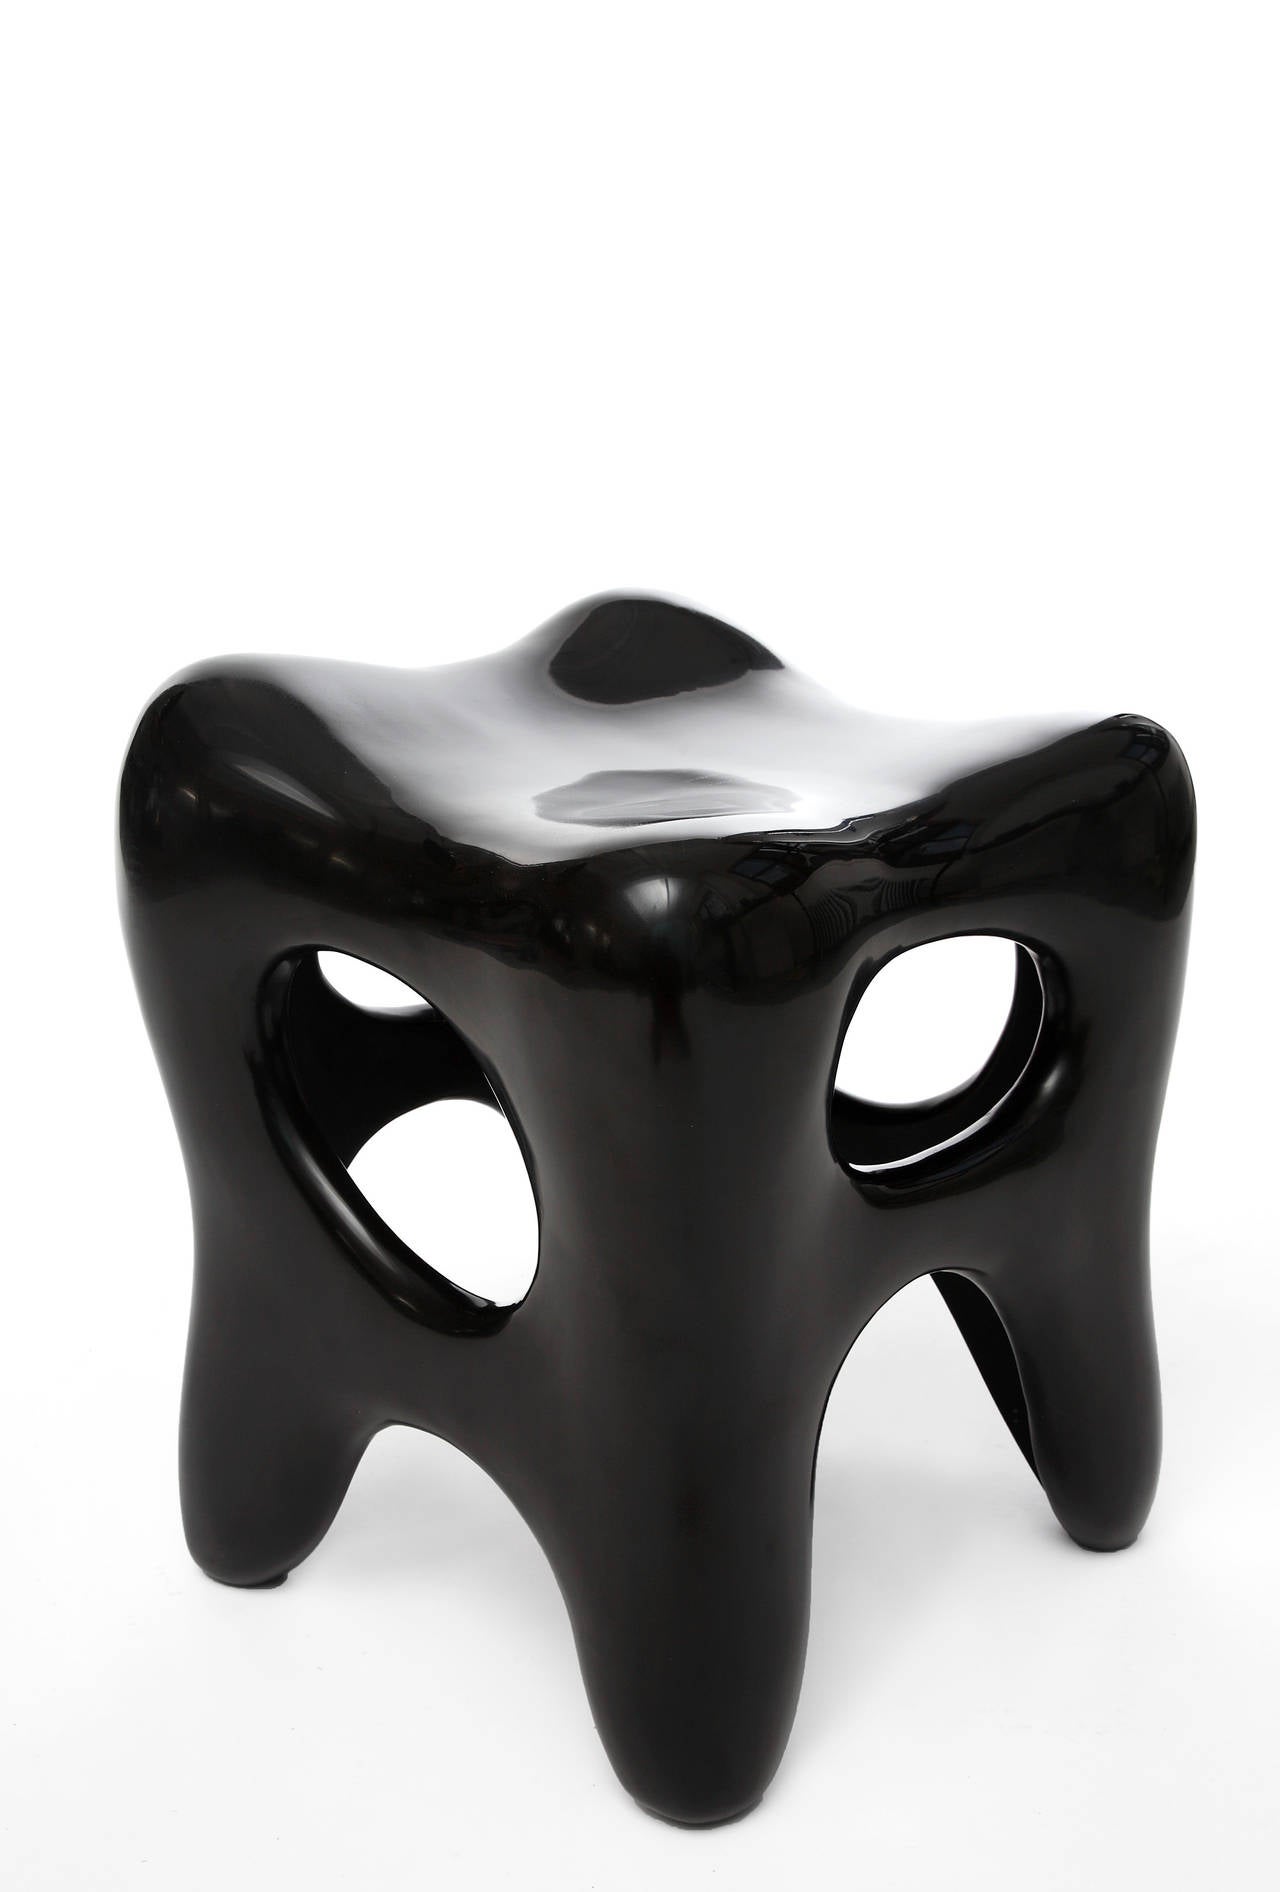 Sculpted stools made of recycled wood and finished with black lacquer.
Jacques Jarrige plays with positive and negative space in his sculpted work creating movement in its environment. Their sensual shape makes them endearing and they are very